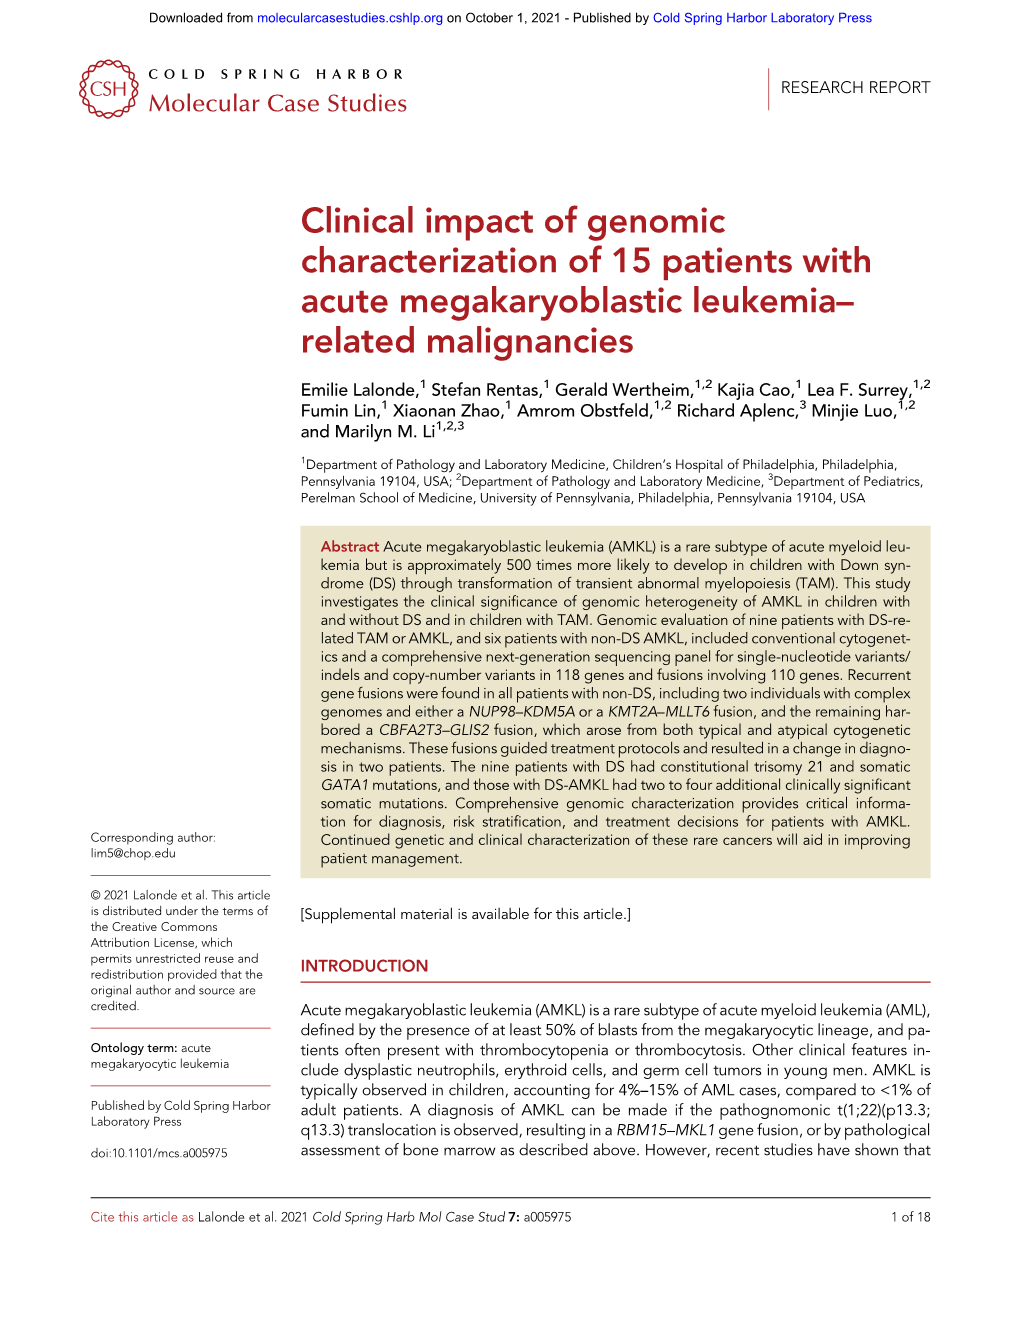 Clinical Impact of Genomic Characterization of 15 Patients with Acute Megakaryoblastic Leukemia– Related Malignancies